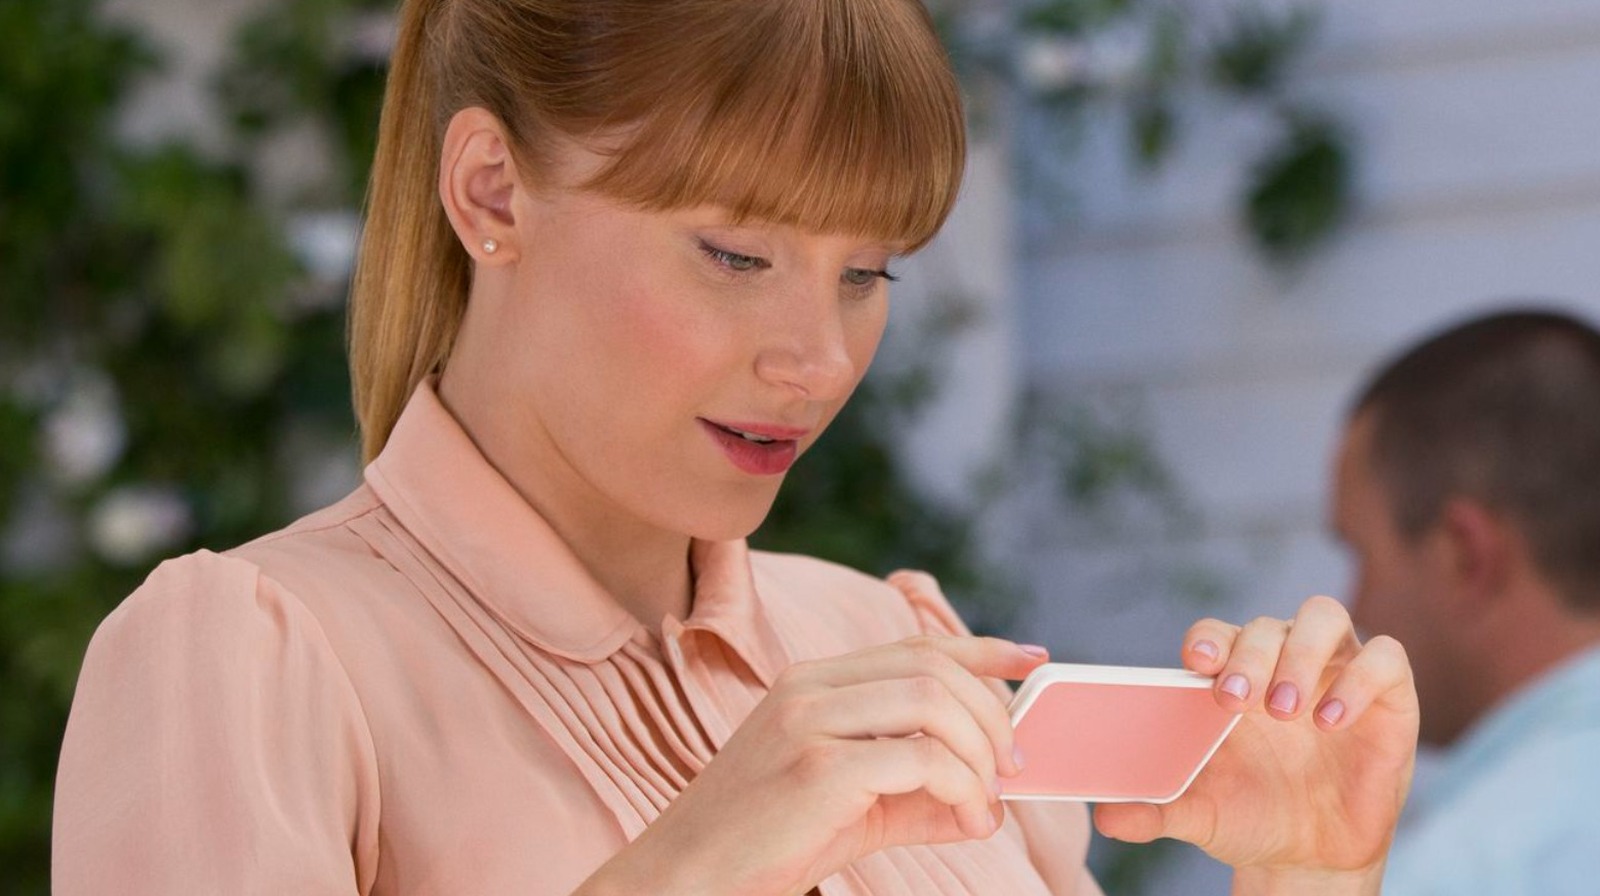 Black Mirror Moved To Netflix Because It Wasn’t ‘Black Mirror’ Enough For Channel 4